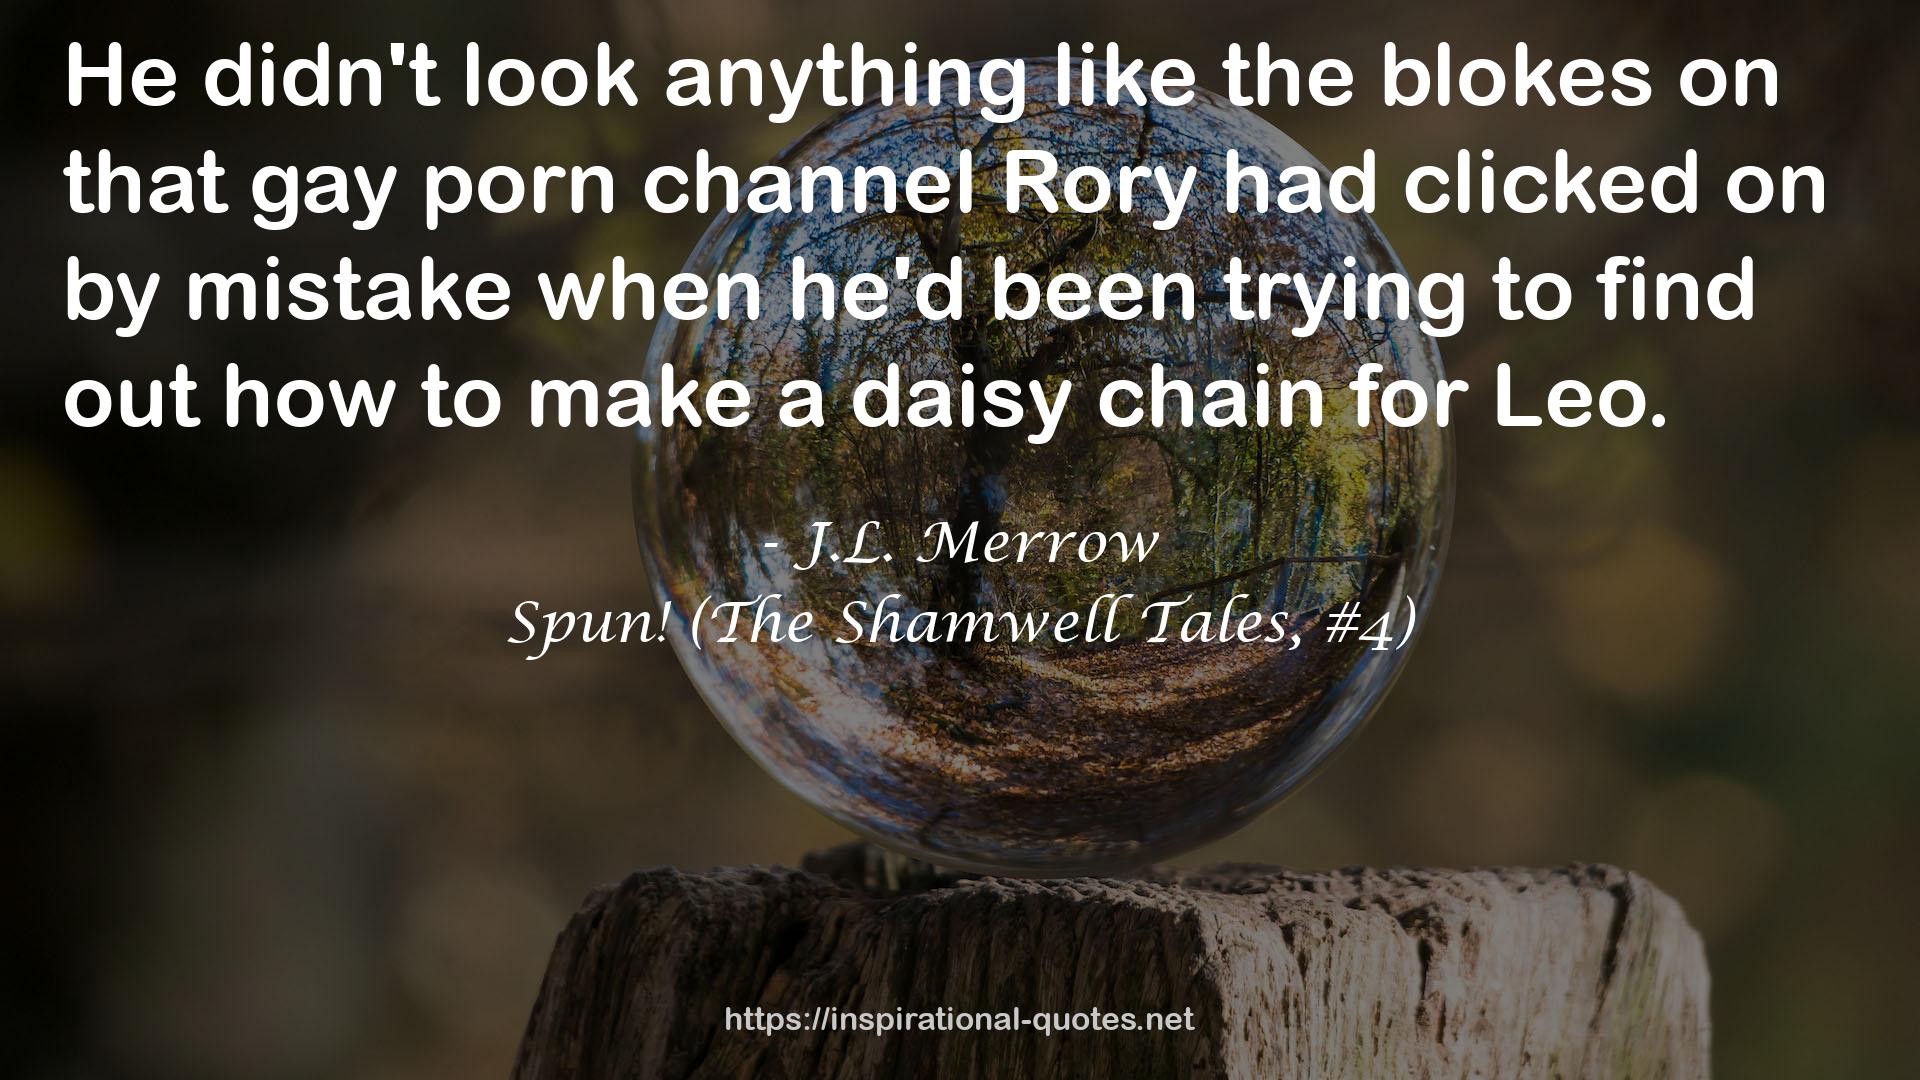 Spun! (The Shamwell Tales, #4) QUOTES